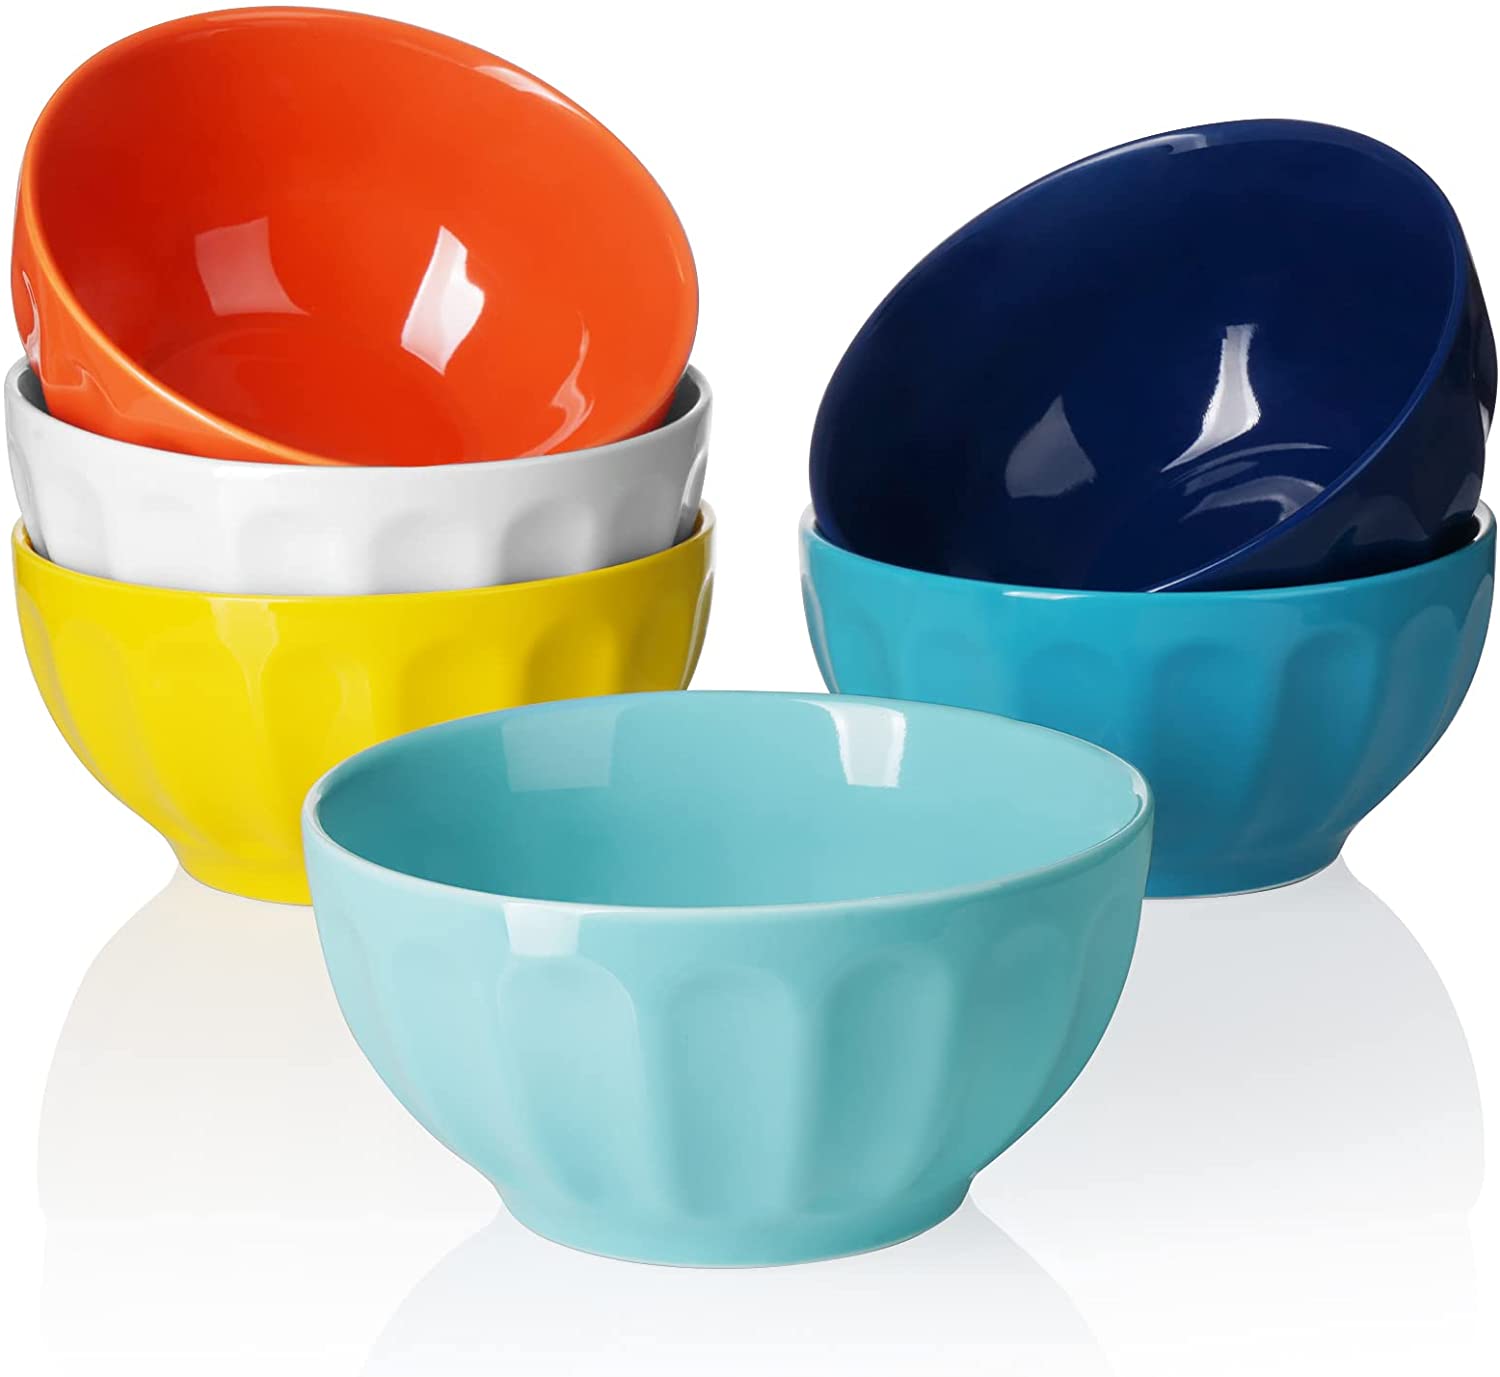 Sweese 26 Ounce Hot Assorted Colors Porcelain Bowls 6-Piece for $16.99 + Free Shippig